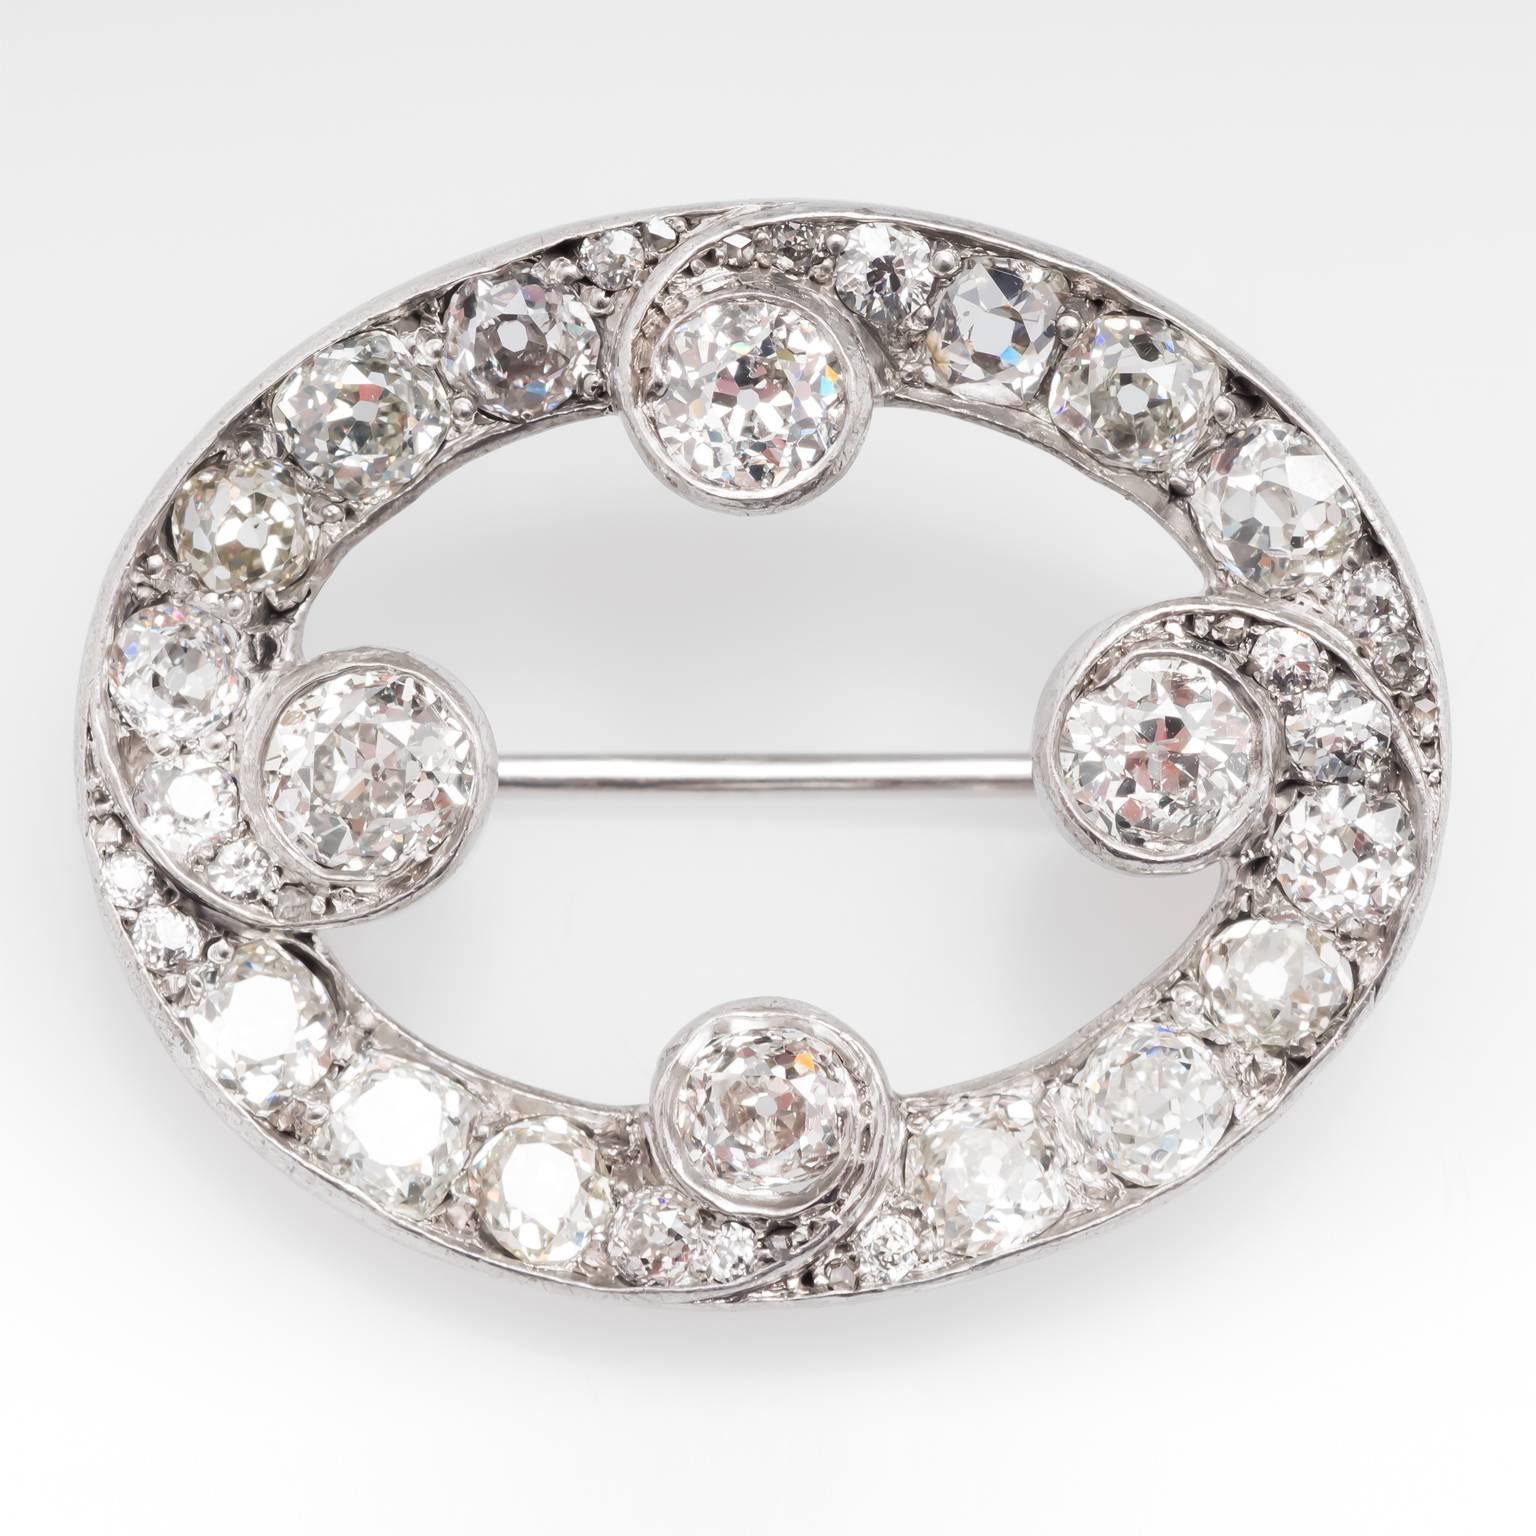 This stunning antique brooch pin contains 8.5 carats of natural diamonds. It features a mixture of 4 different antique cut diamonds including rose cut, French cut, Old European cut, and Old Mine cut. All the stones have been set into silver which